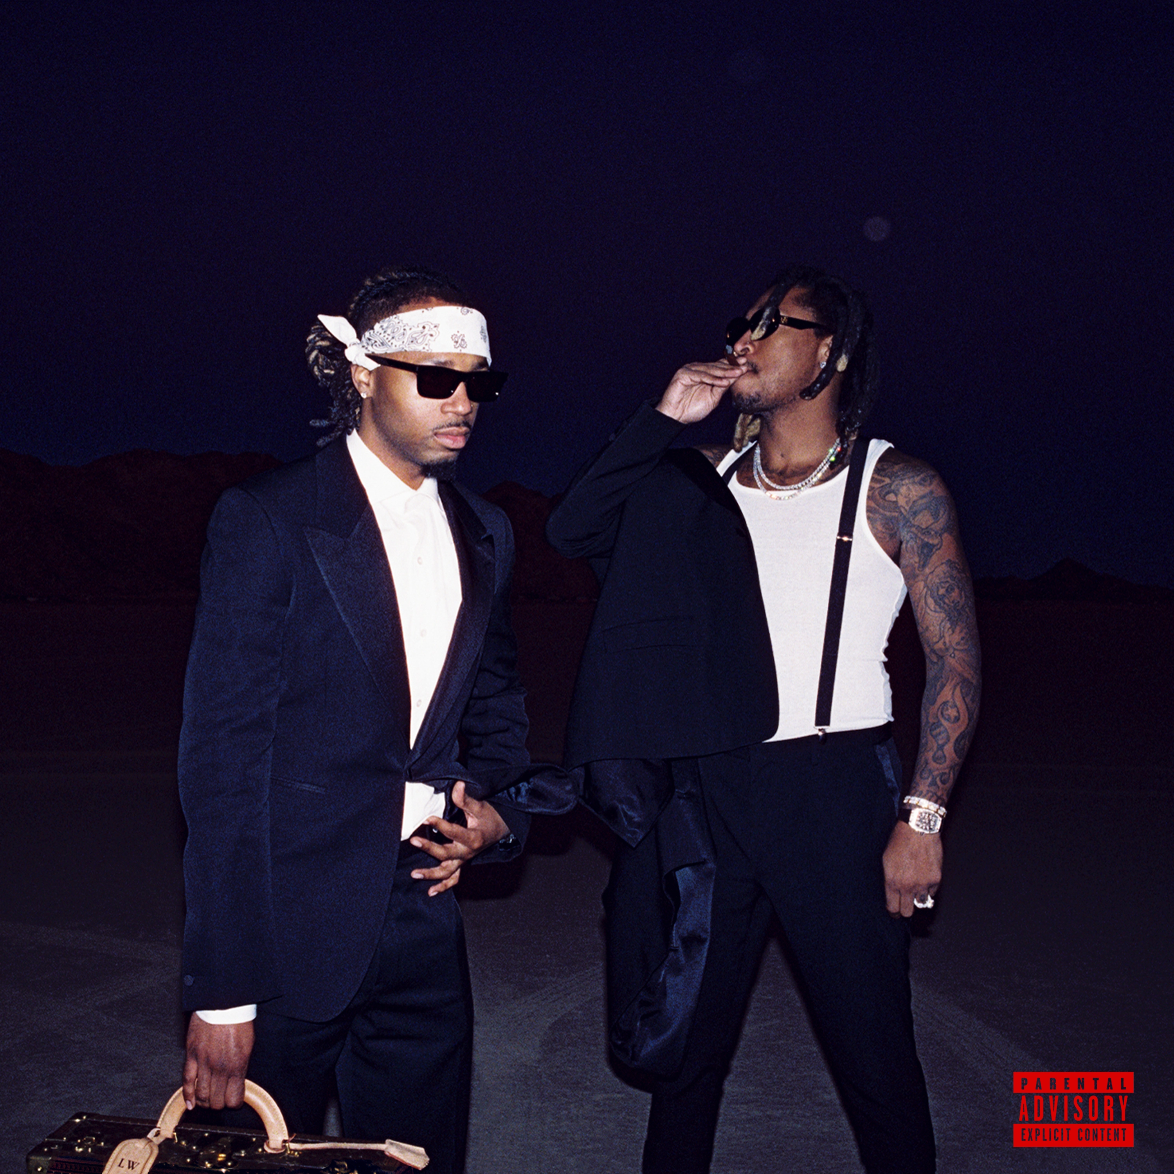 The album is a joint collaboration between Metro Boomin and Future, who have worked on collaboration albums in the past, including “DS2” and many others songs and projects.